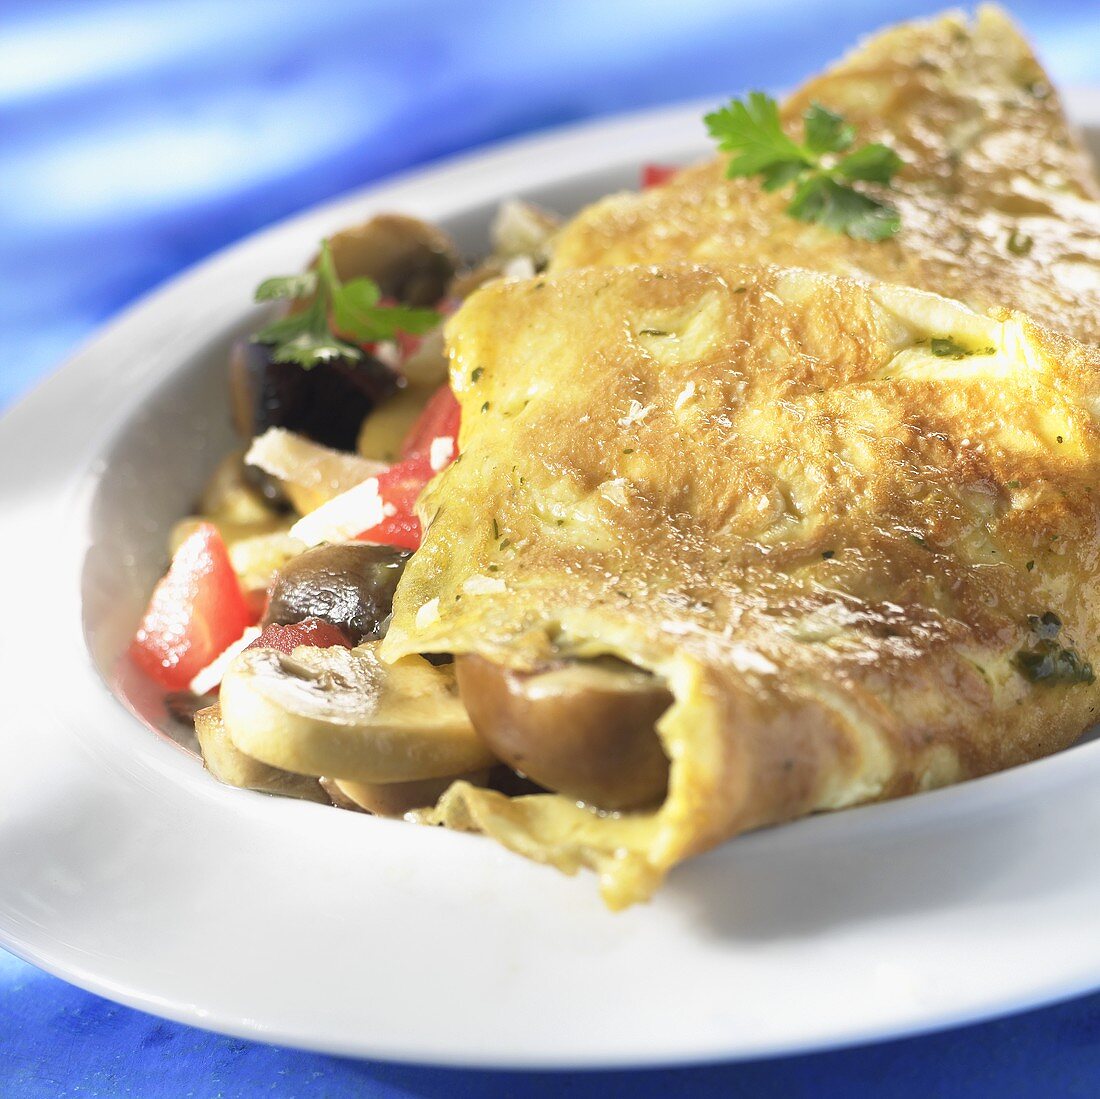 Omelette with mushroom and vegetable filling